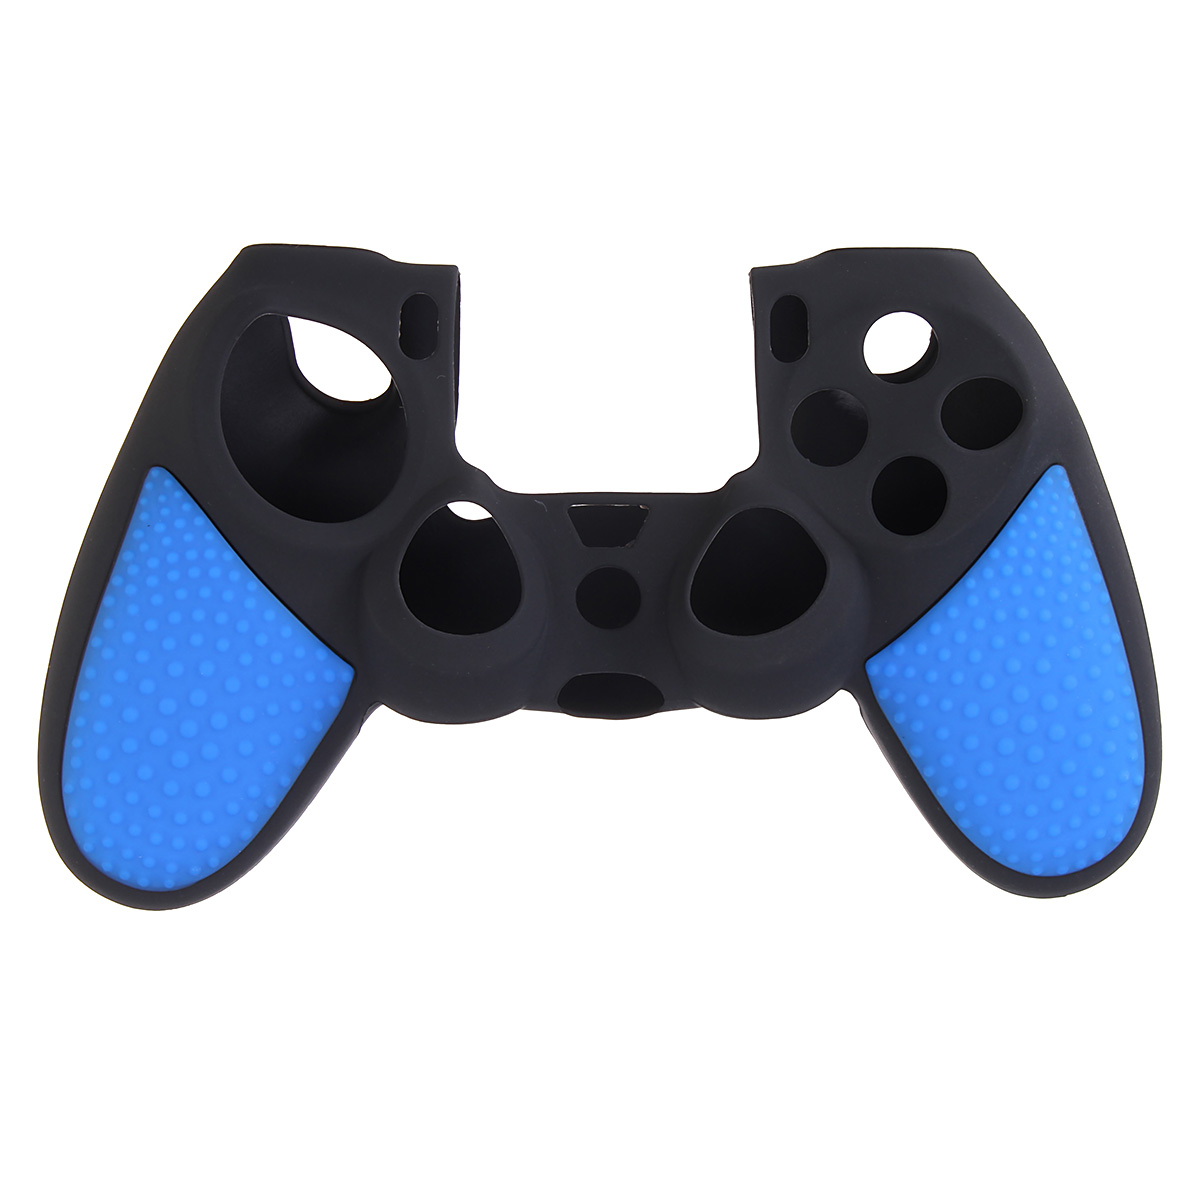 Silicon Cover Case Protection Skin for SONY for Playstation 4 PS4 for Dualshock 4 Game Controller 8